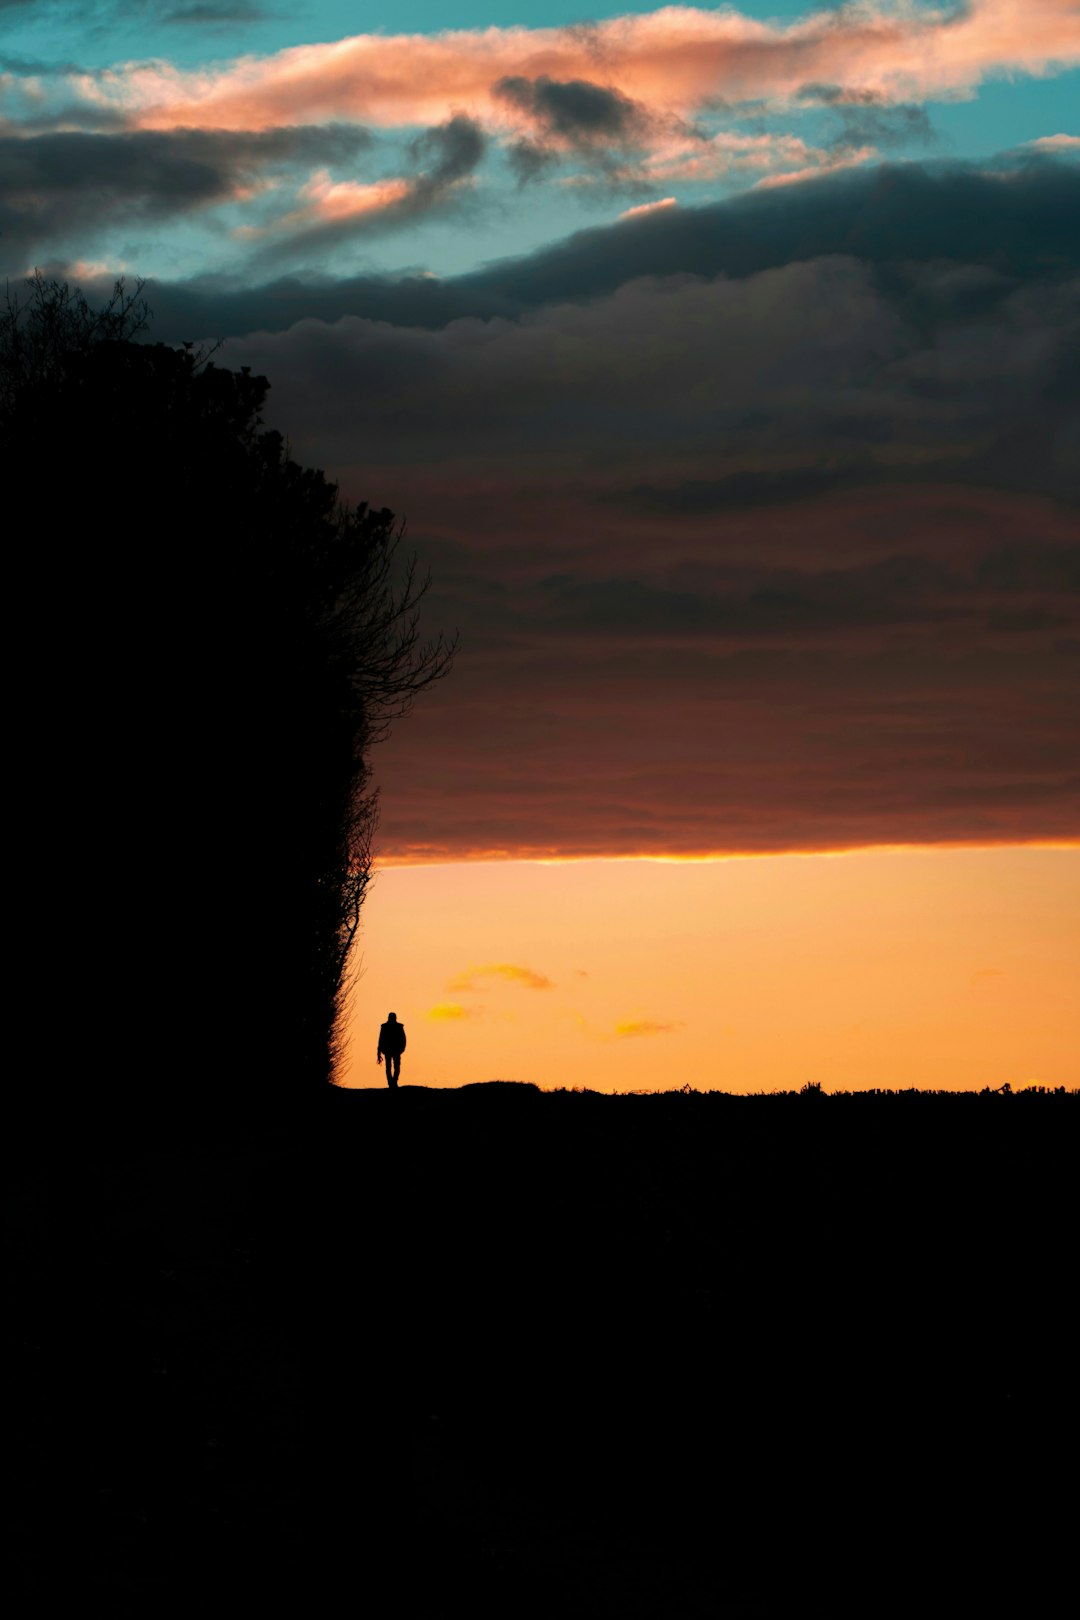 silhouette of person standing on rock during sunset